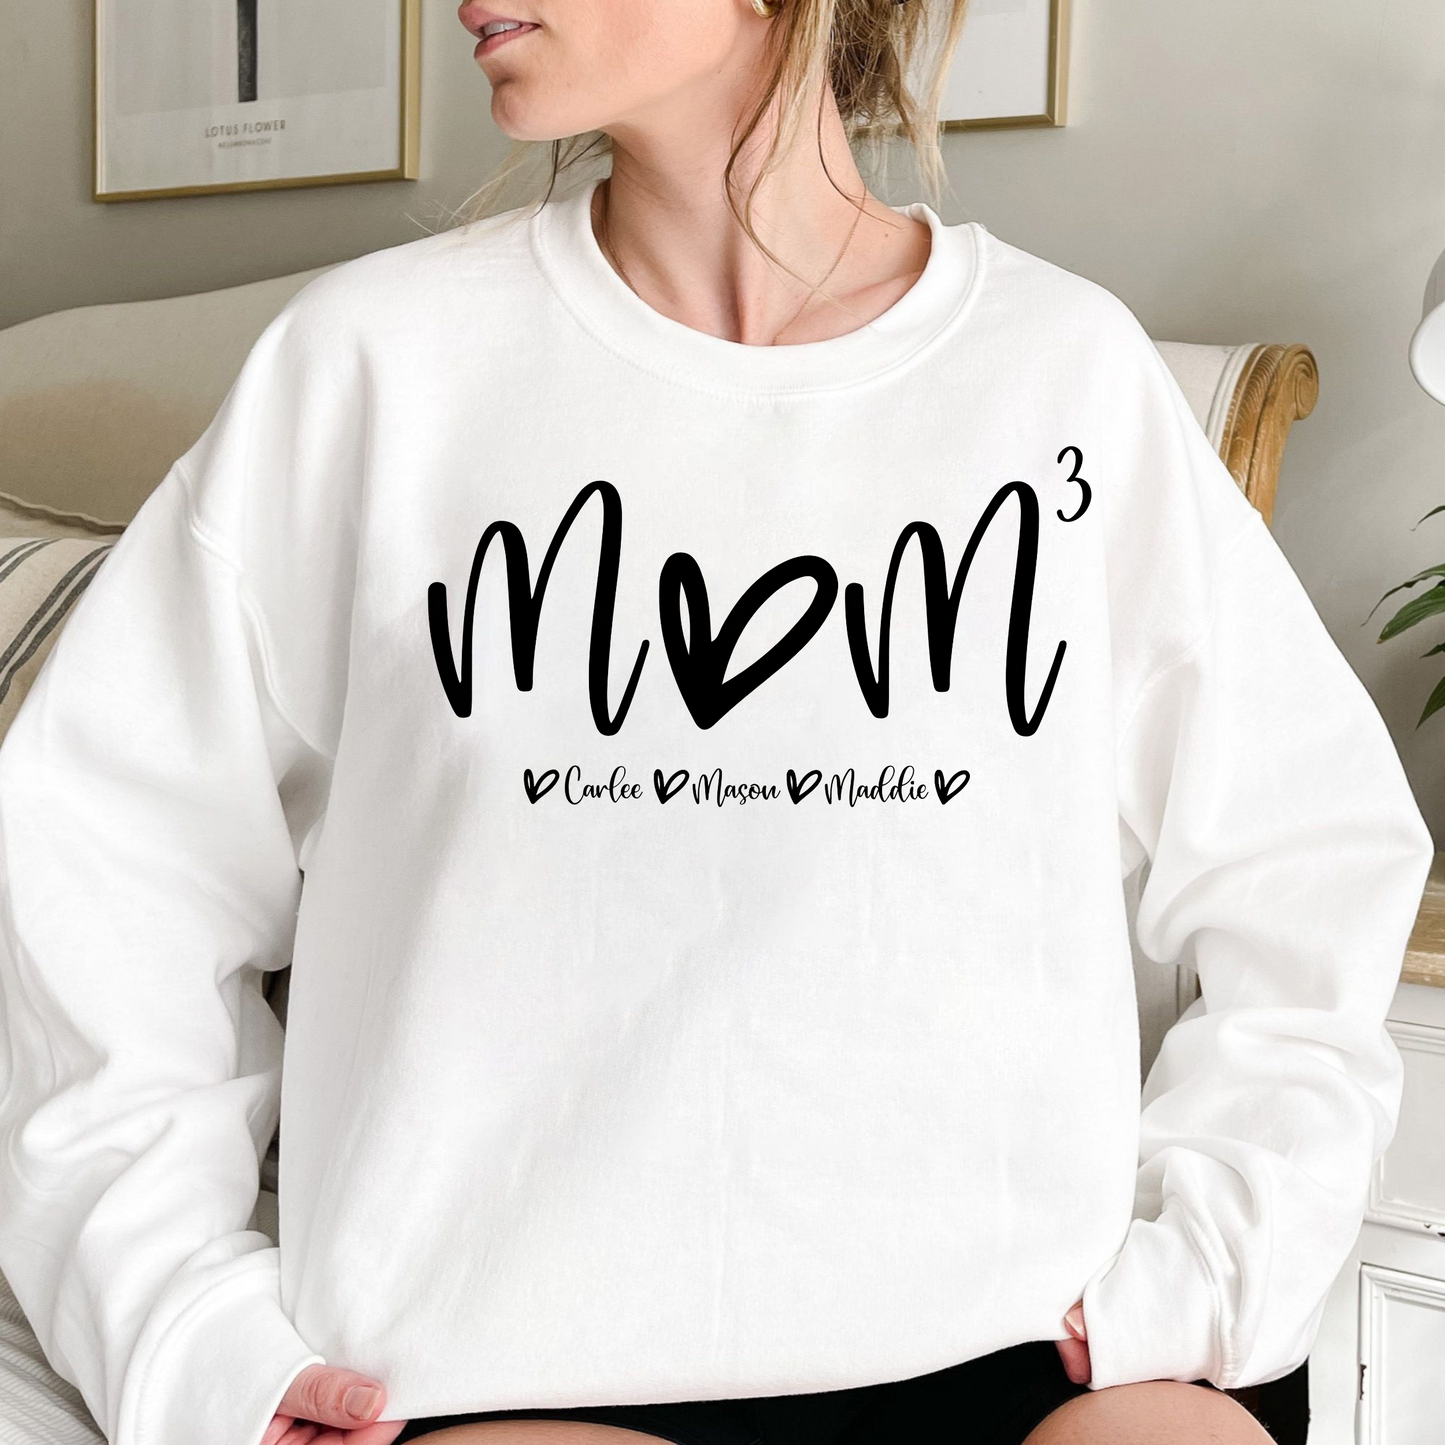 "Mom^N" Shirt: Customize Kids' Count & Names - Perfect Gift